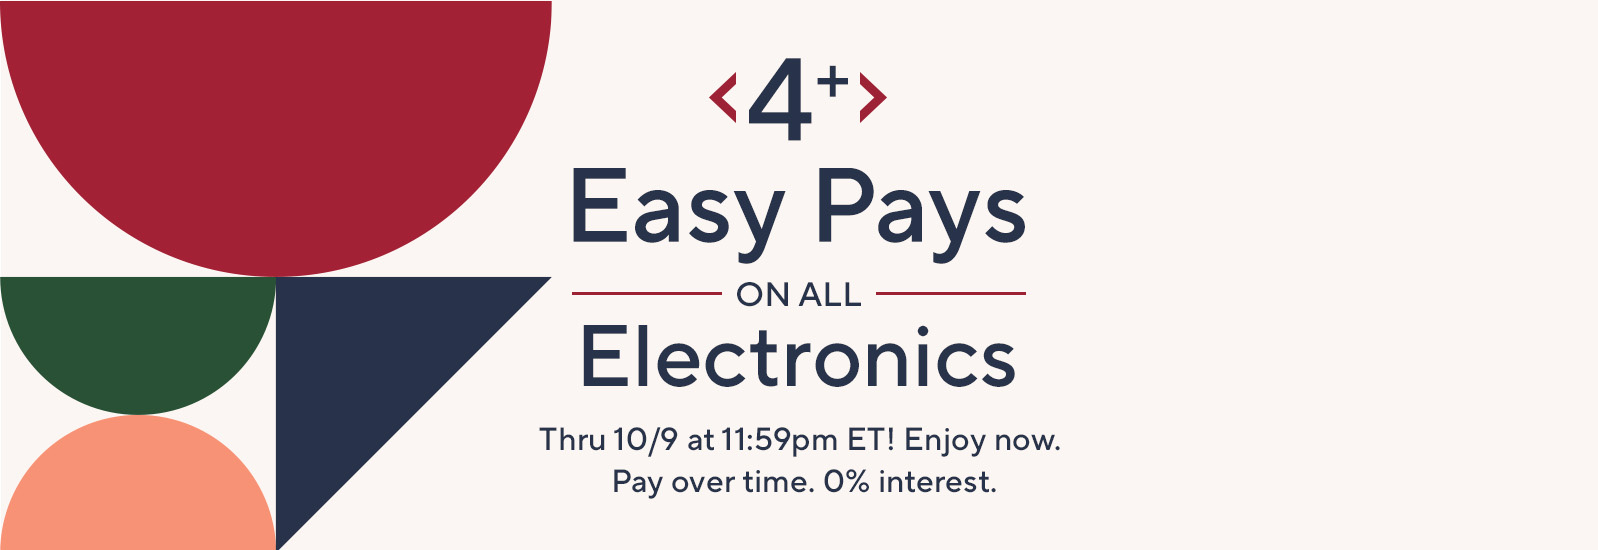 4+ Easy Pays on All Electronics Thru 10/9 at 11:59pm ET! Enjoy now. Pay over time. 0% interest.